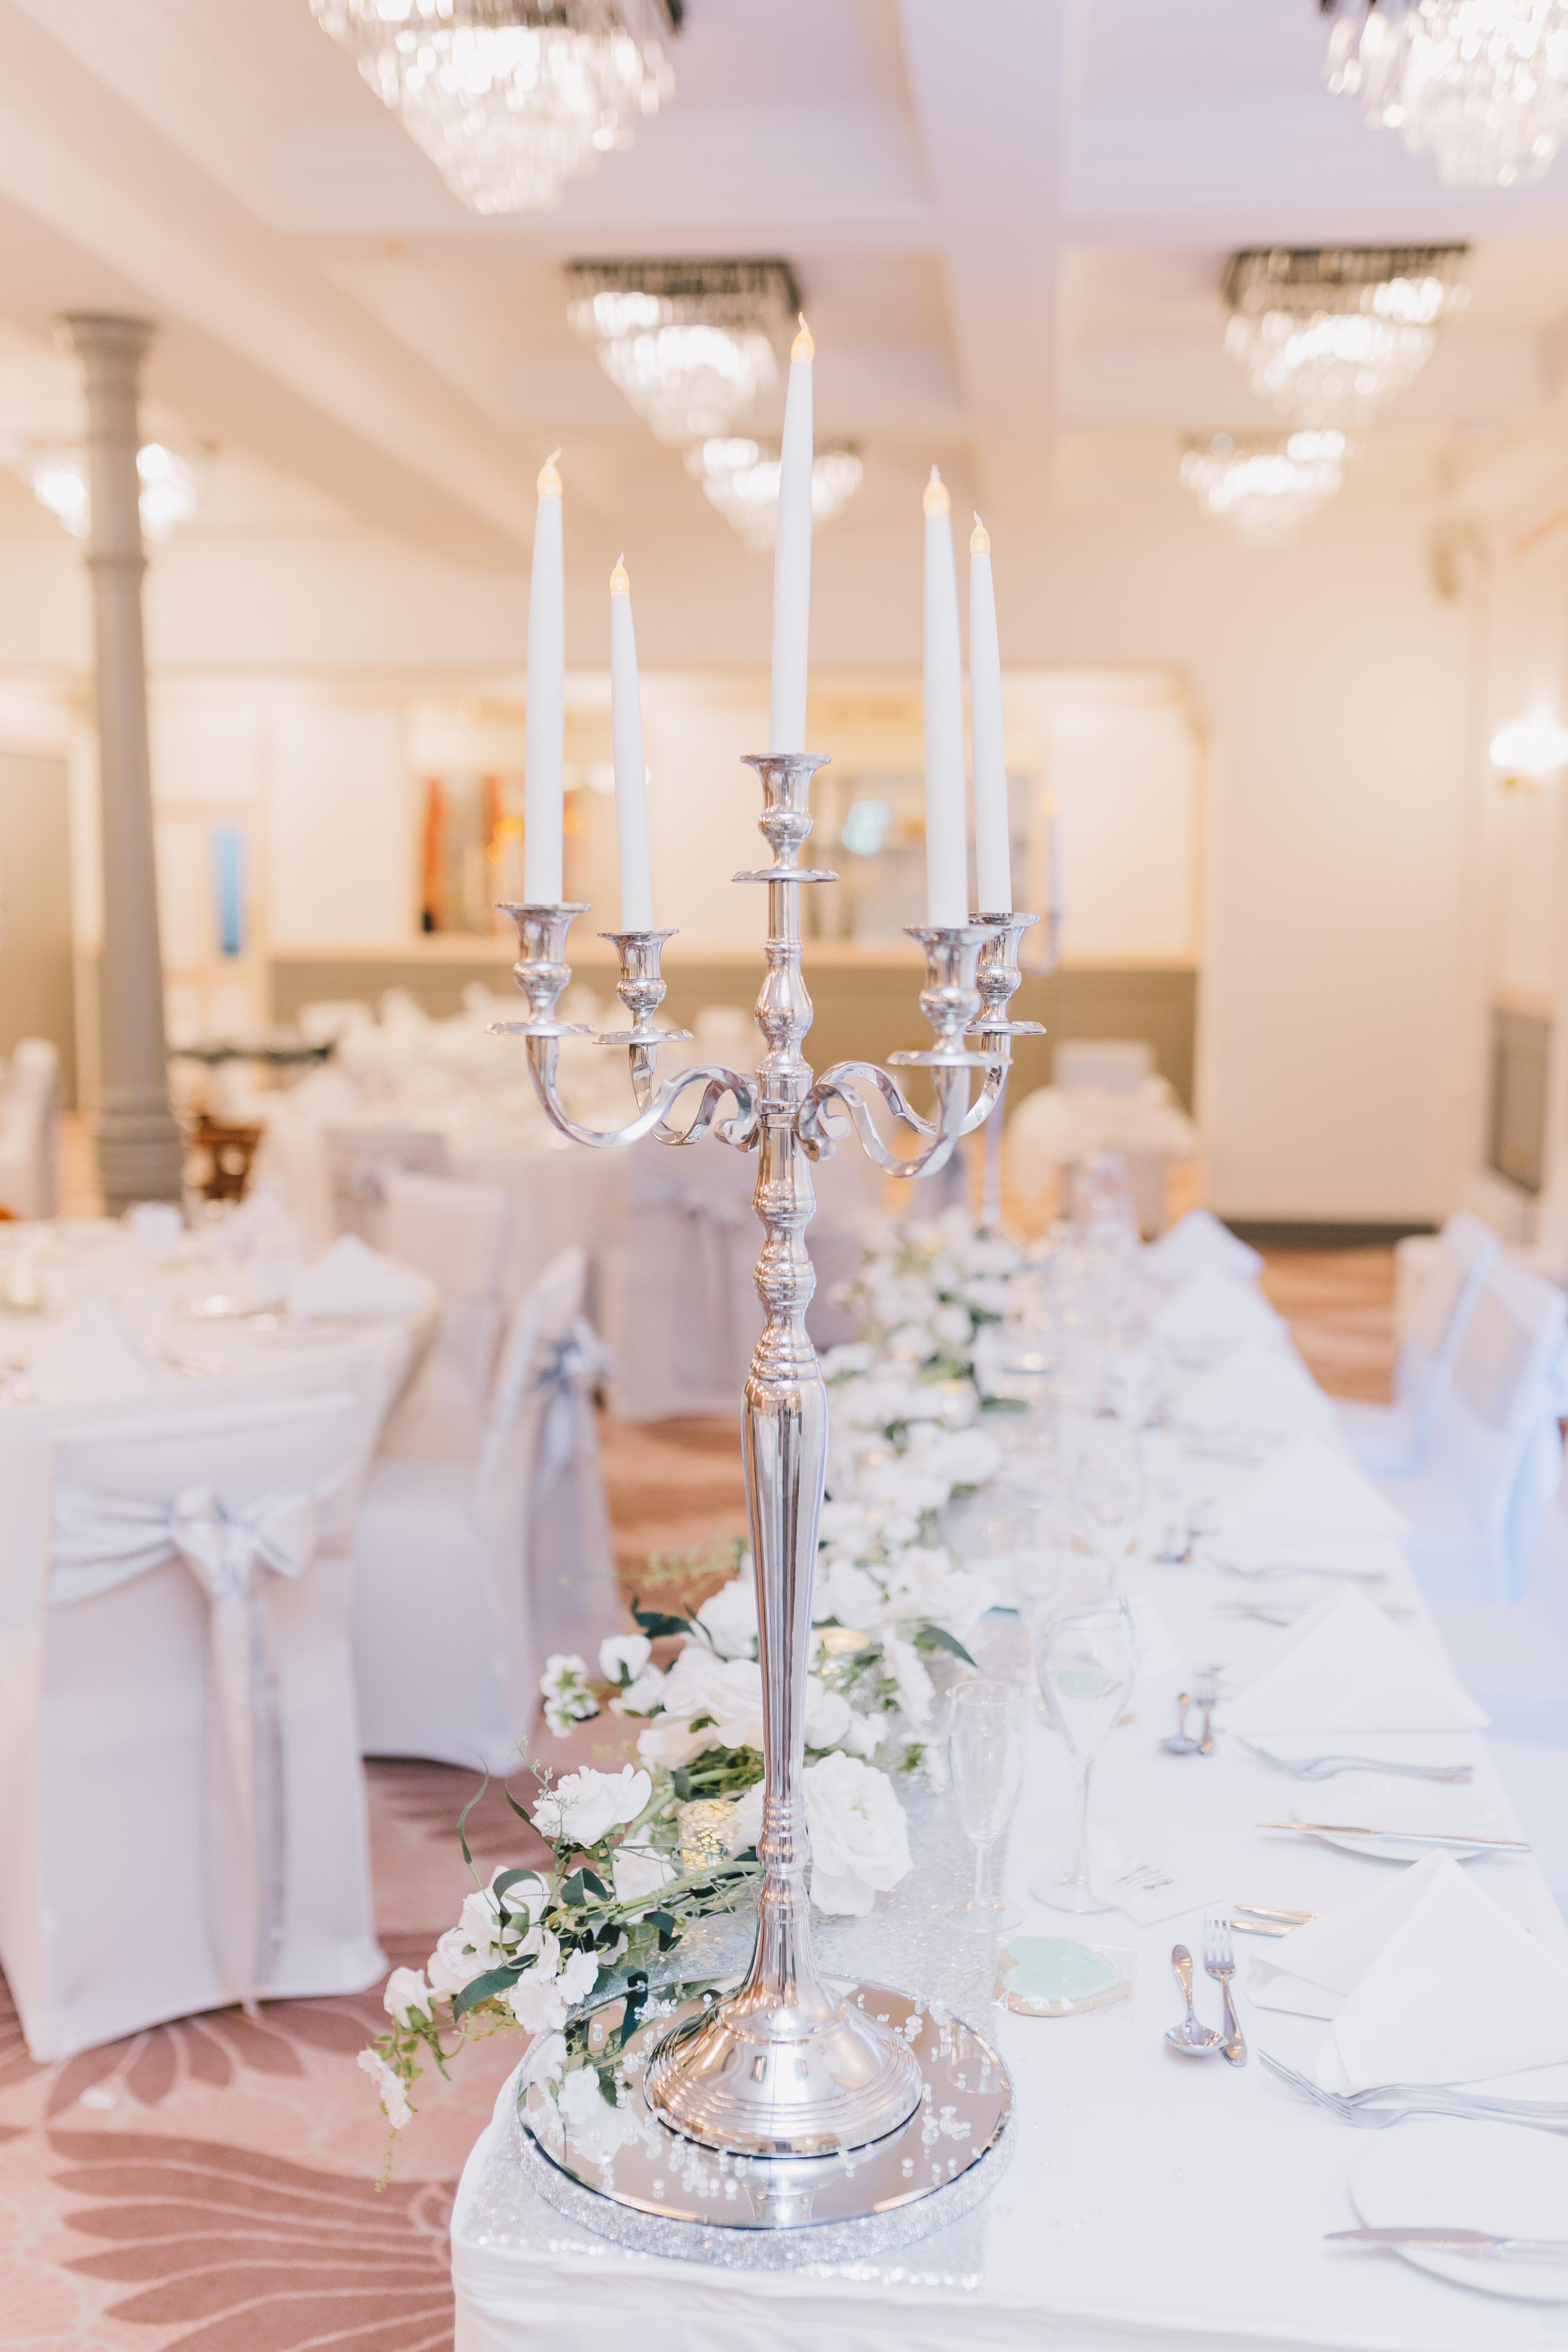 The Bedford Swan Hotel, Weddings And Events photo #3